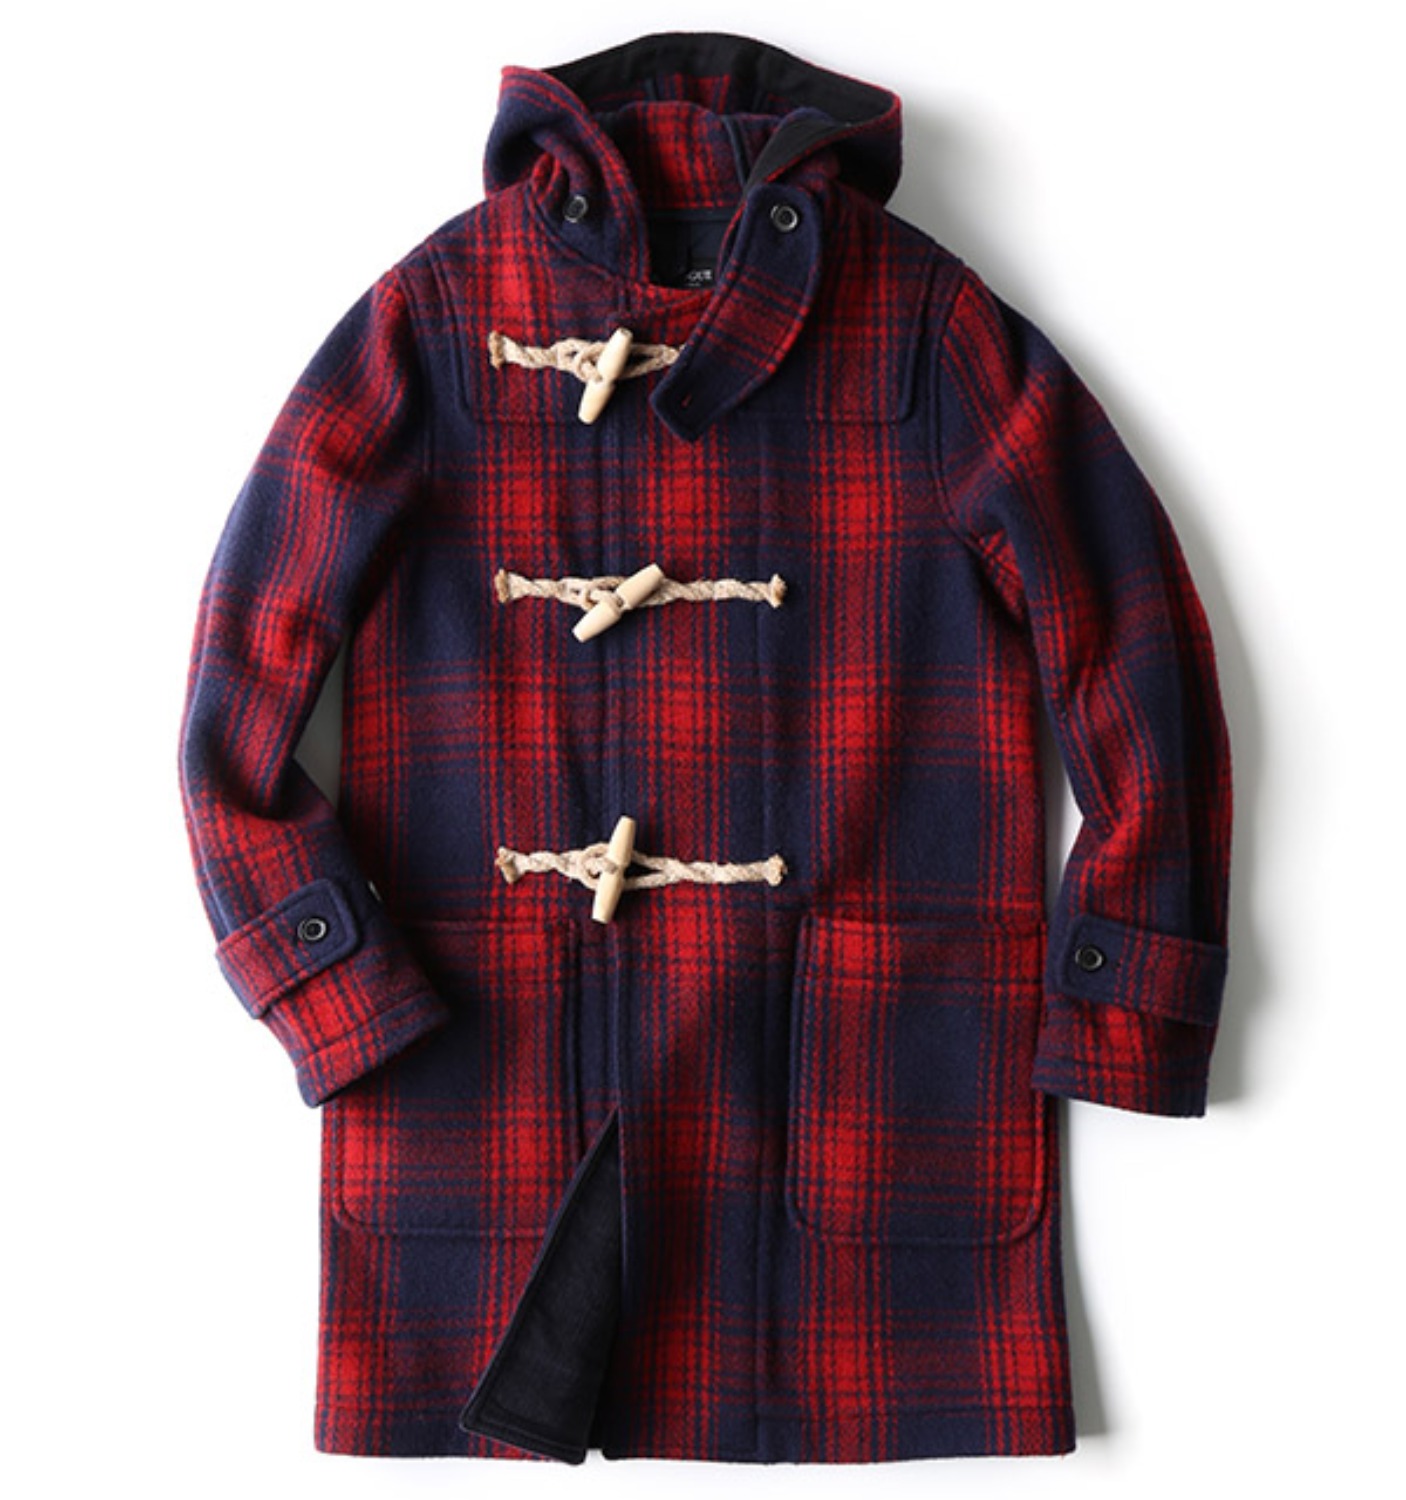 EASTLOGUE X SCULP DUFFLE COAT IN RED CHECK